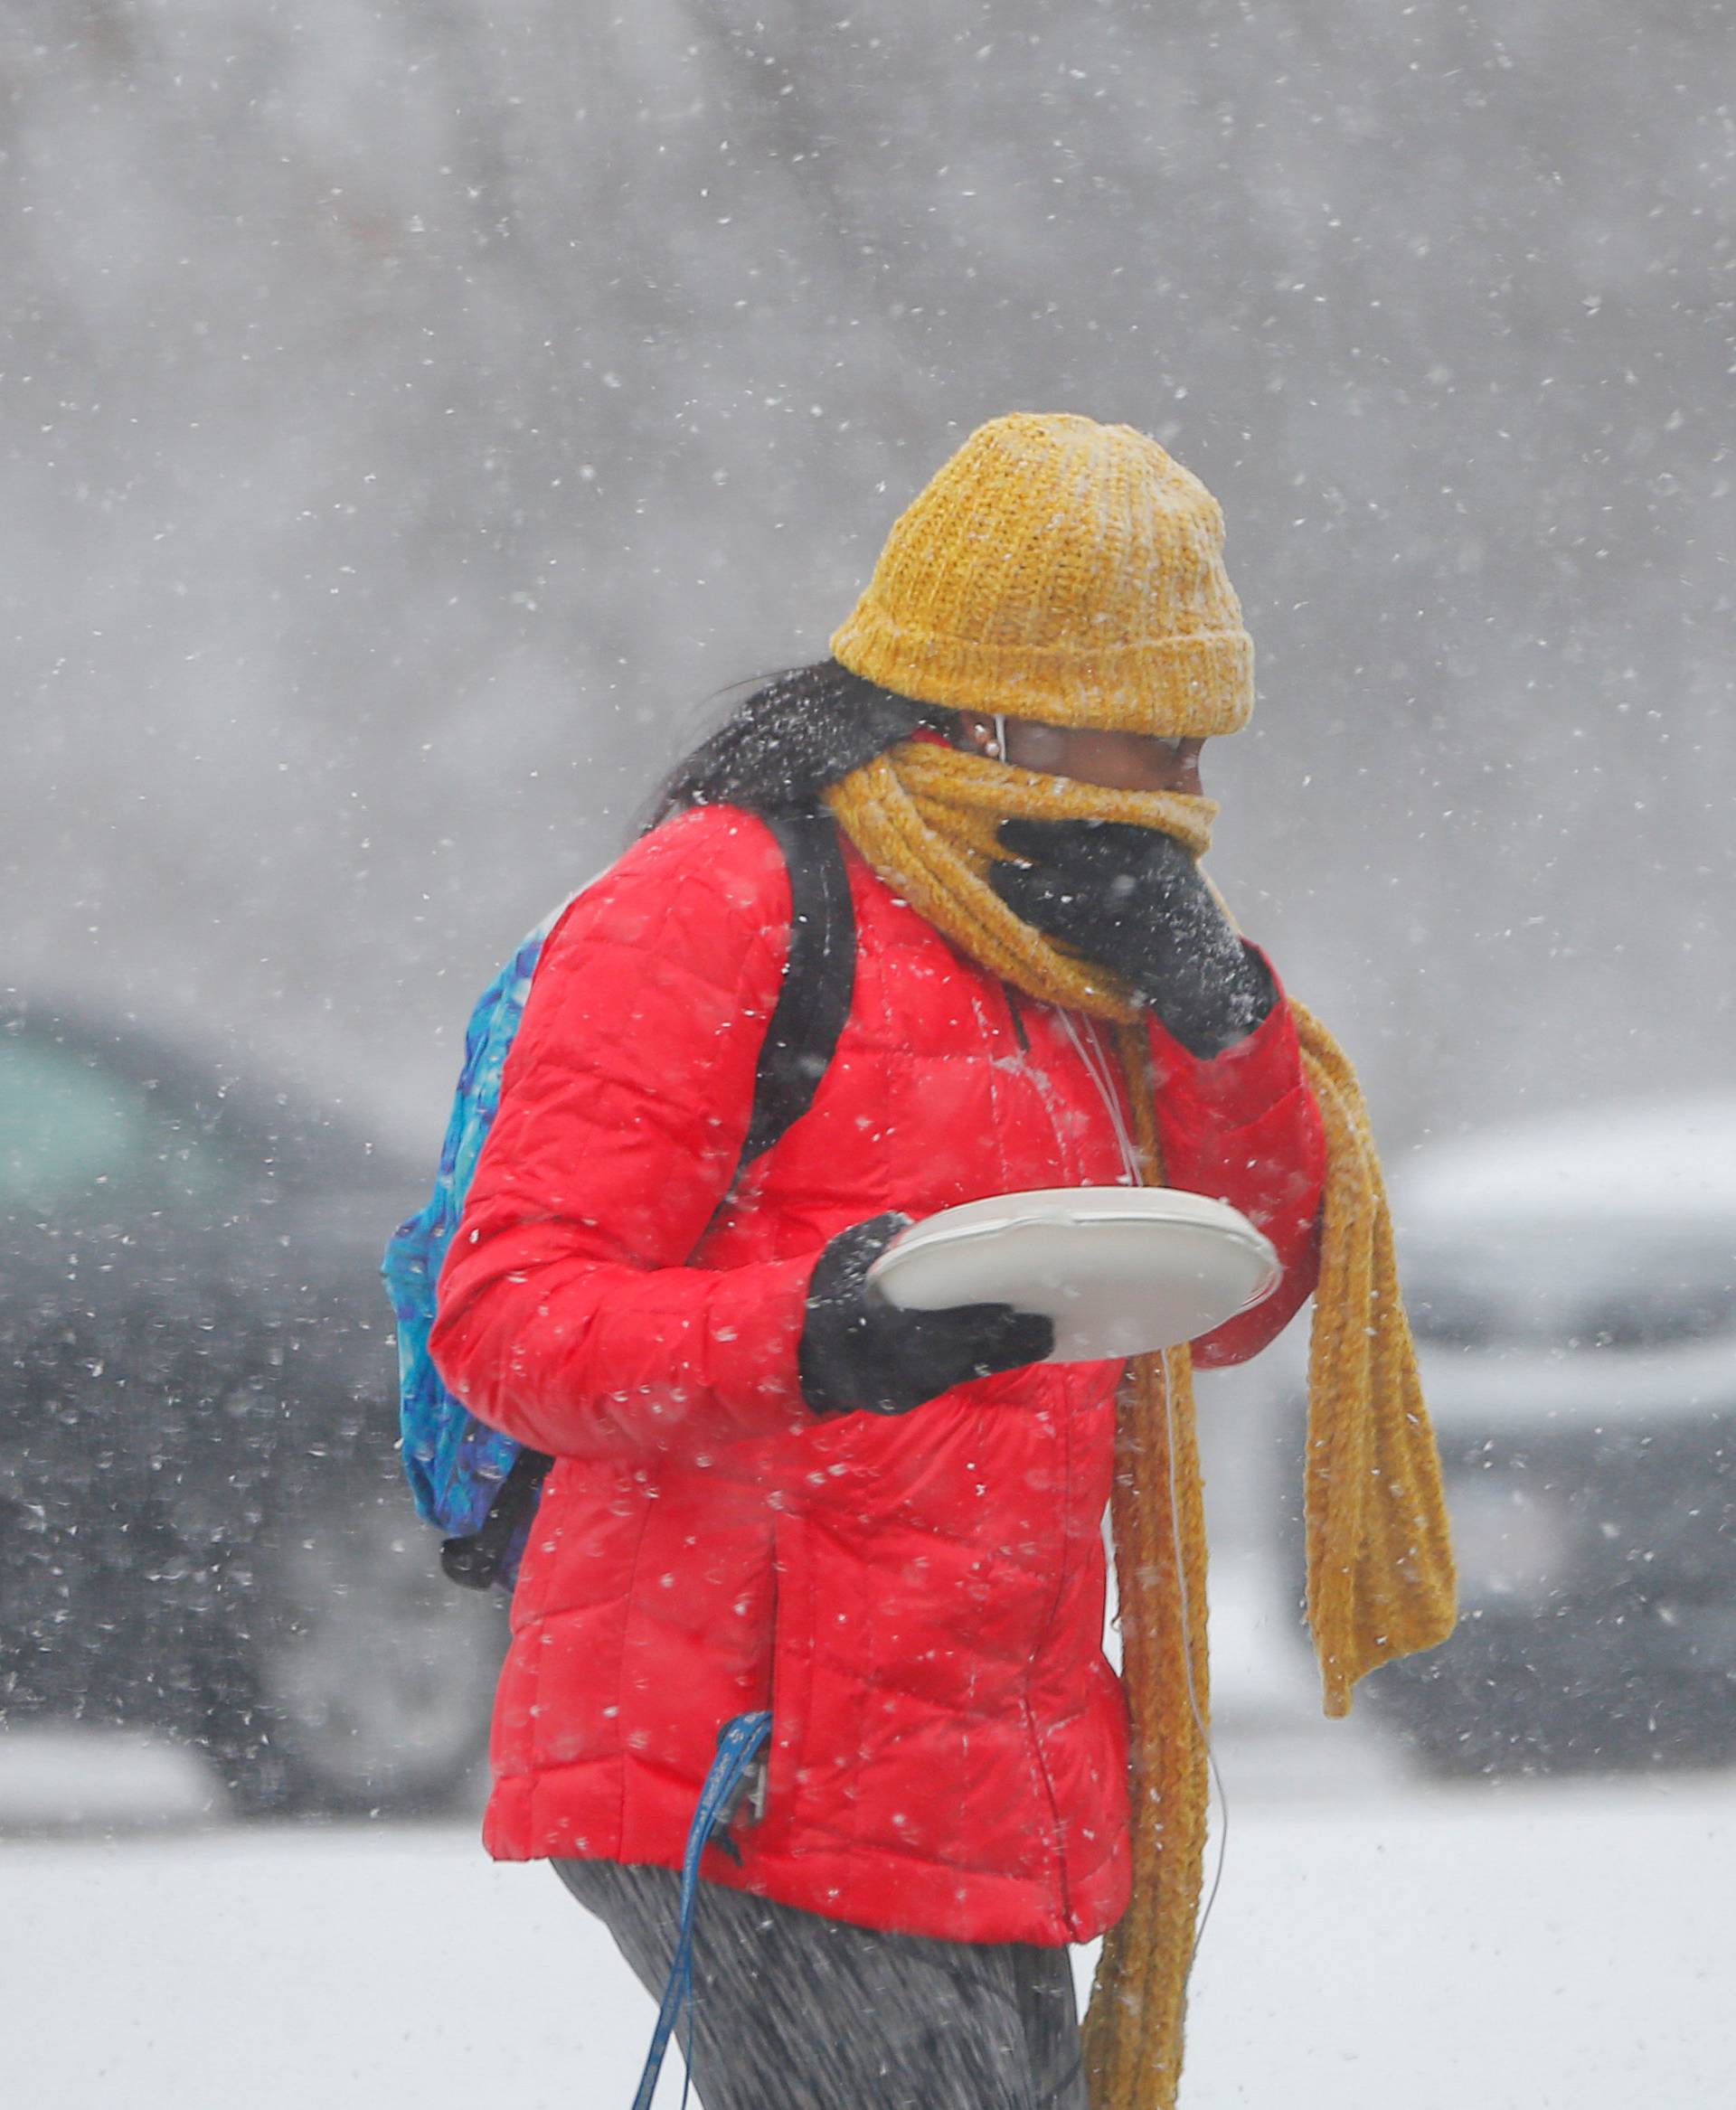 A pedestrian crosses the street during a snow storm in Boston